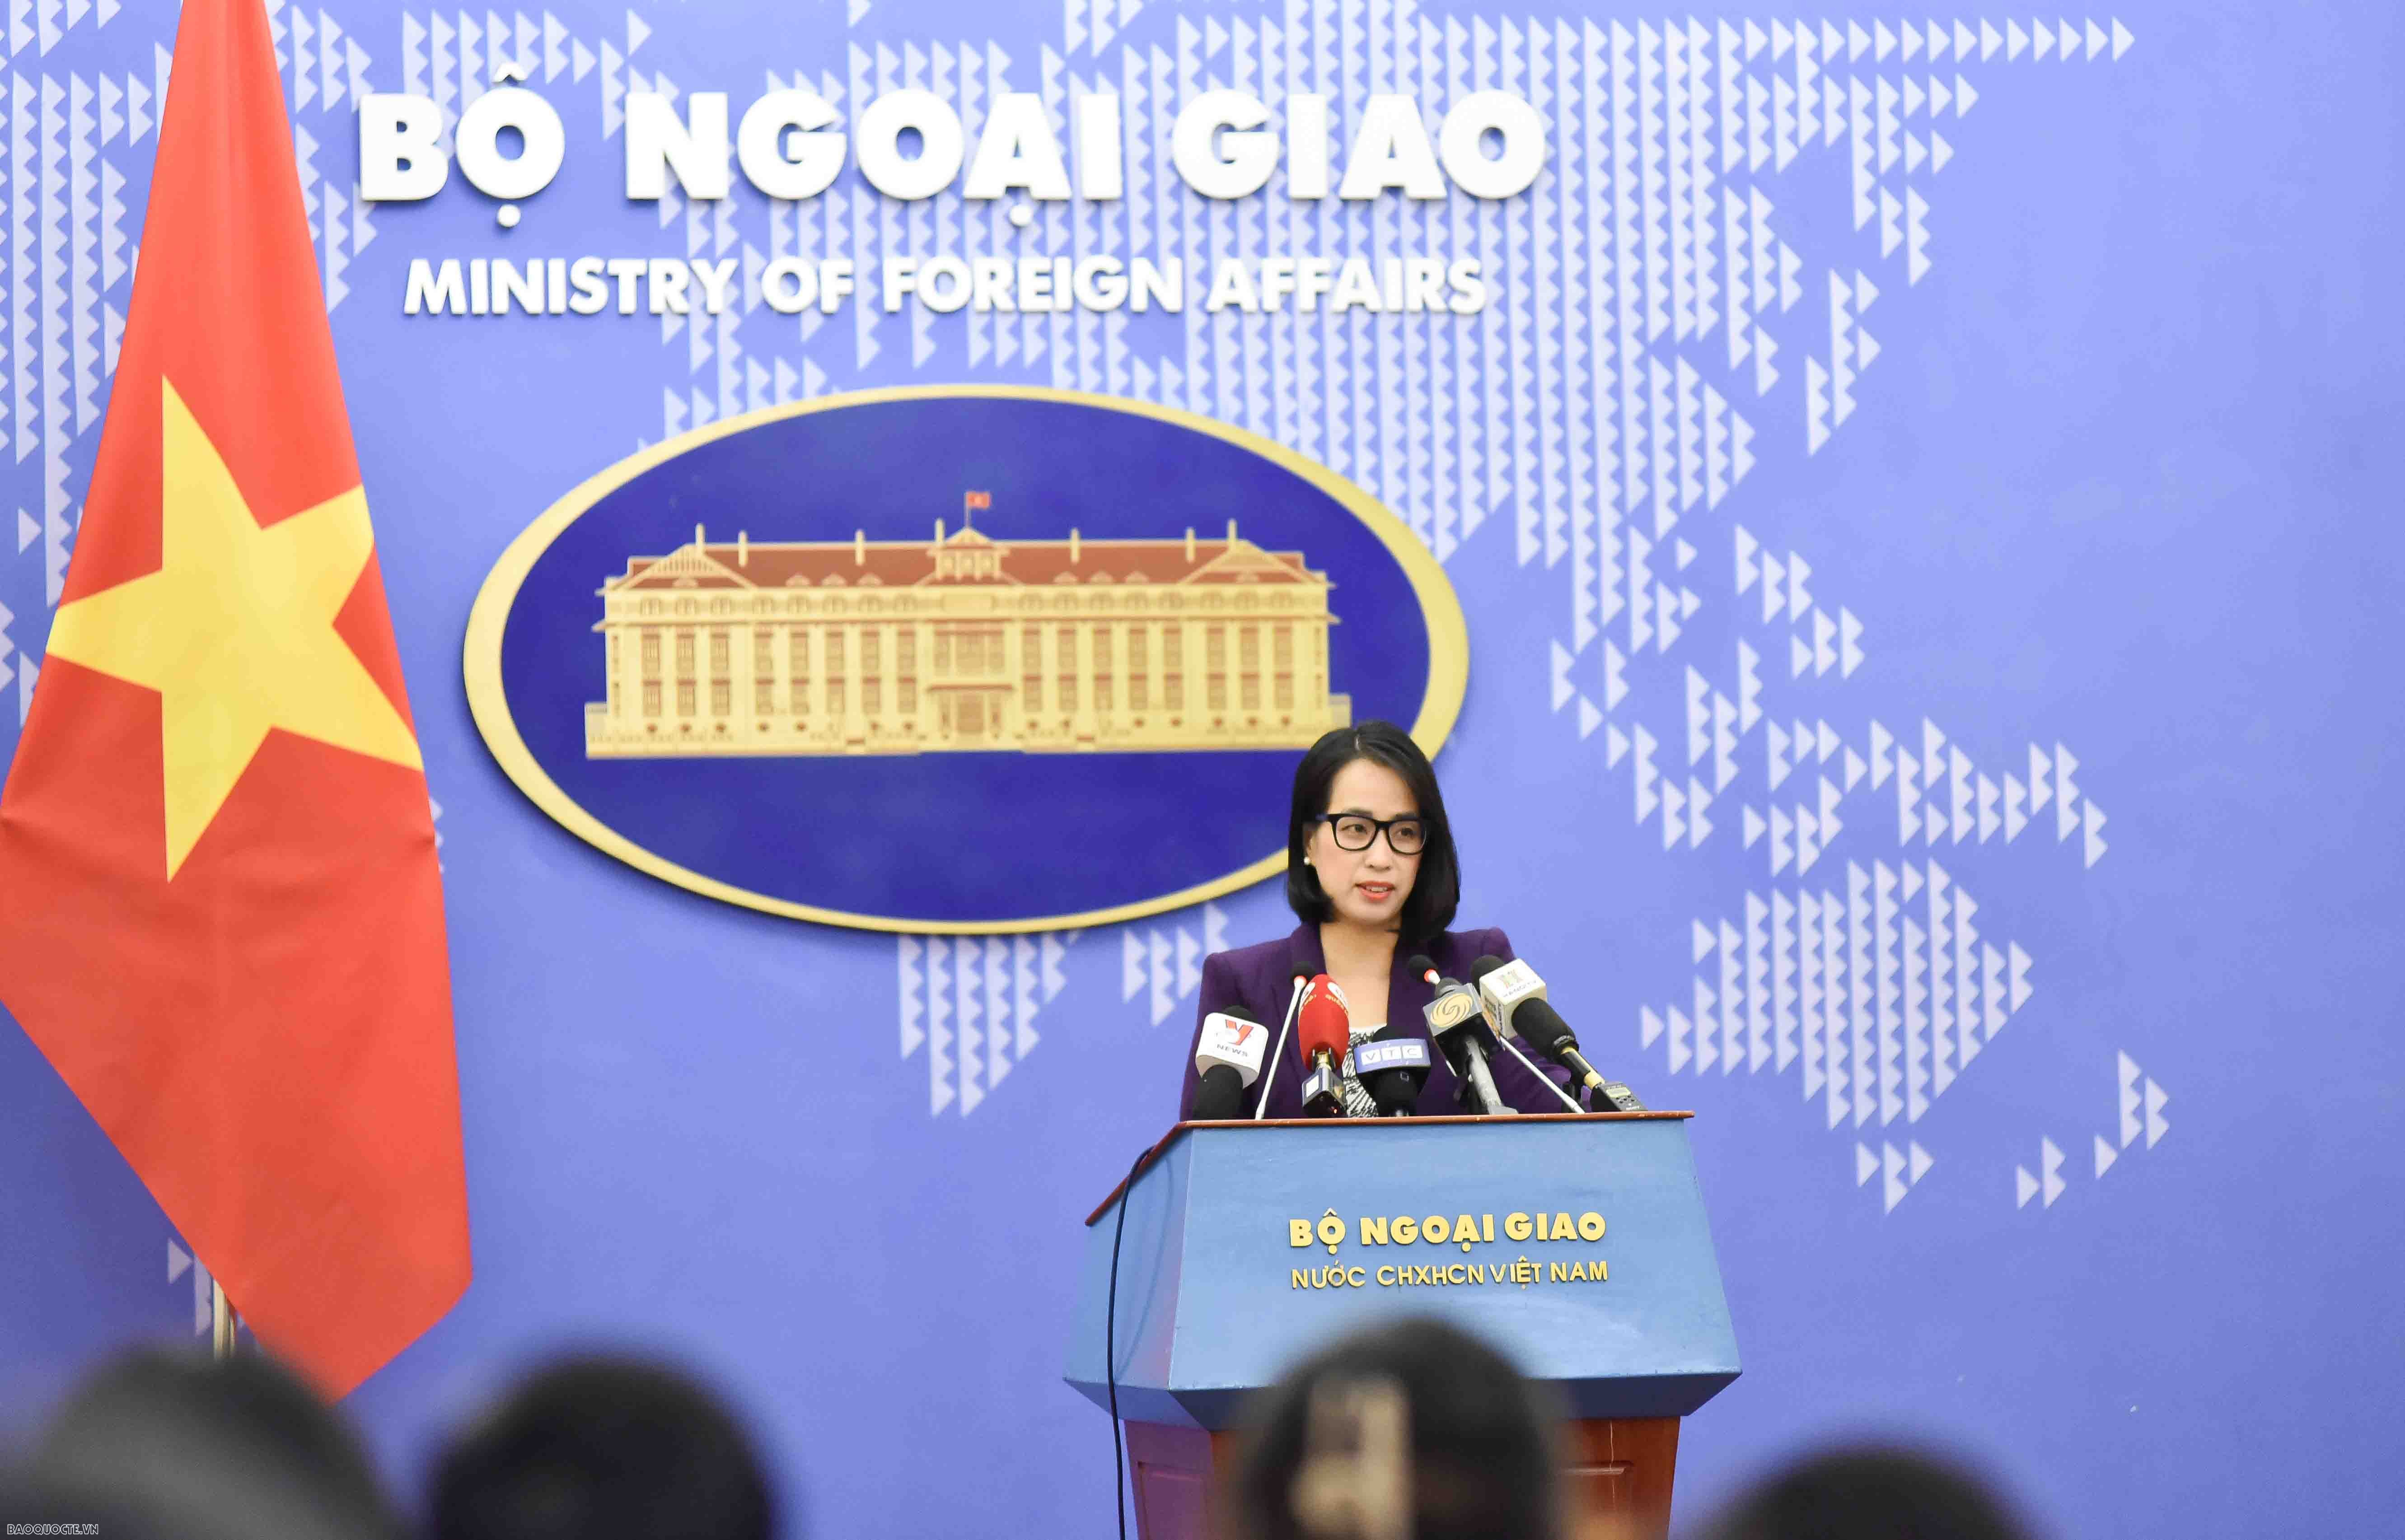 Vietnam requests UN High Commission for Human Rights Office to correct information: Spokesperson